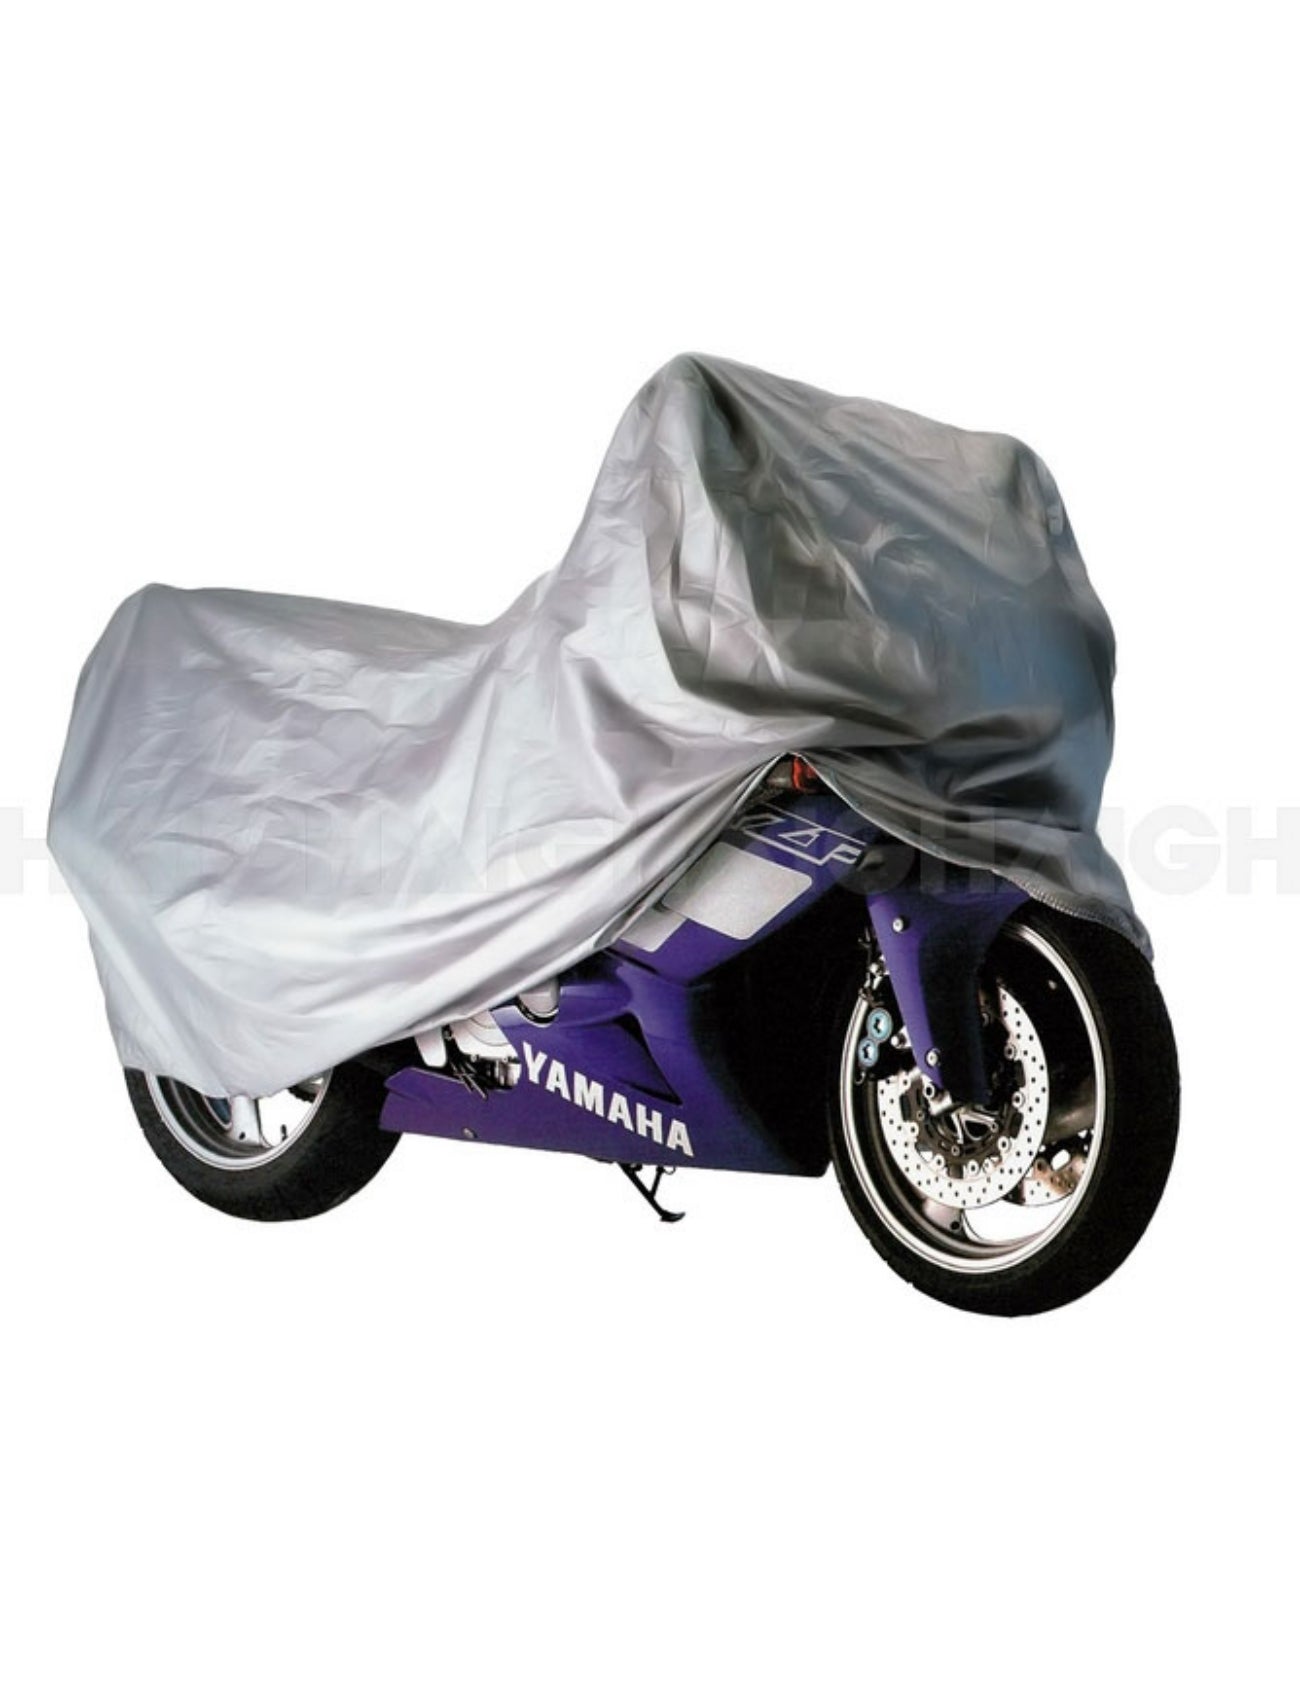 MOTORCYCLE COVER WATERPROOF 500CC-1000CC